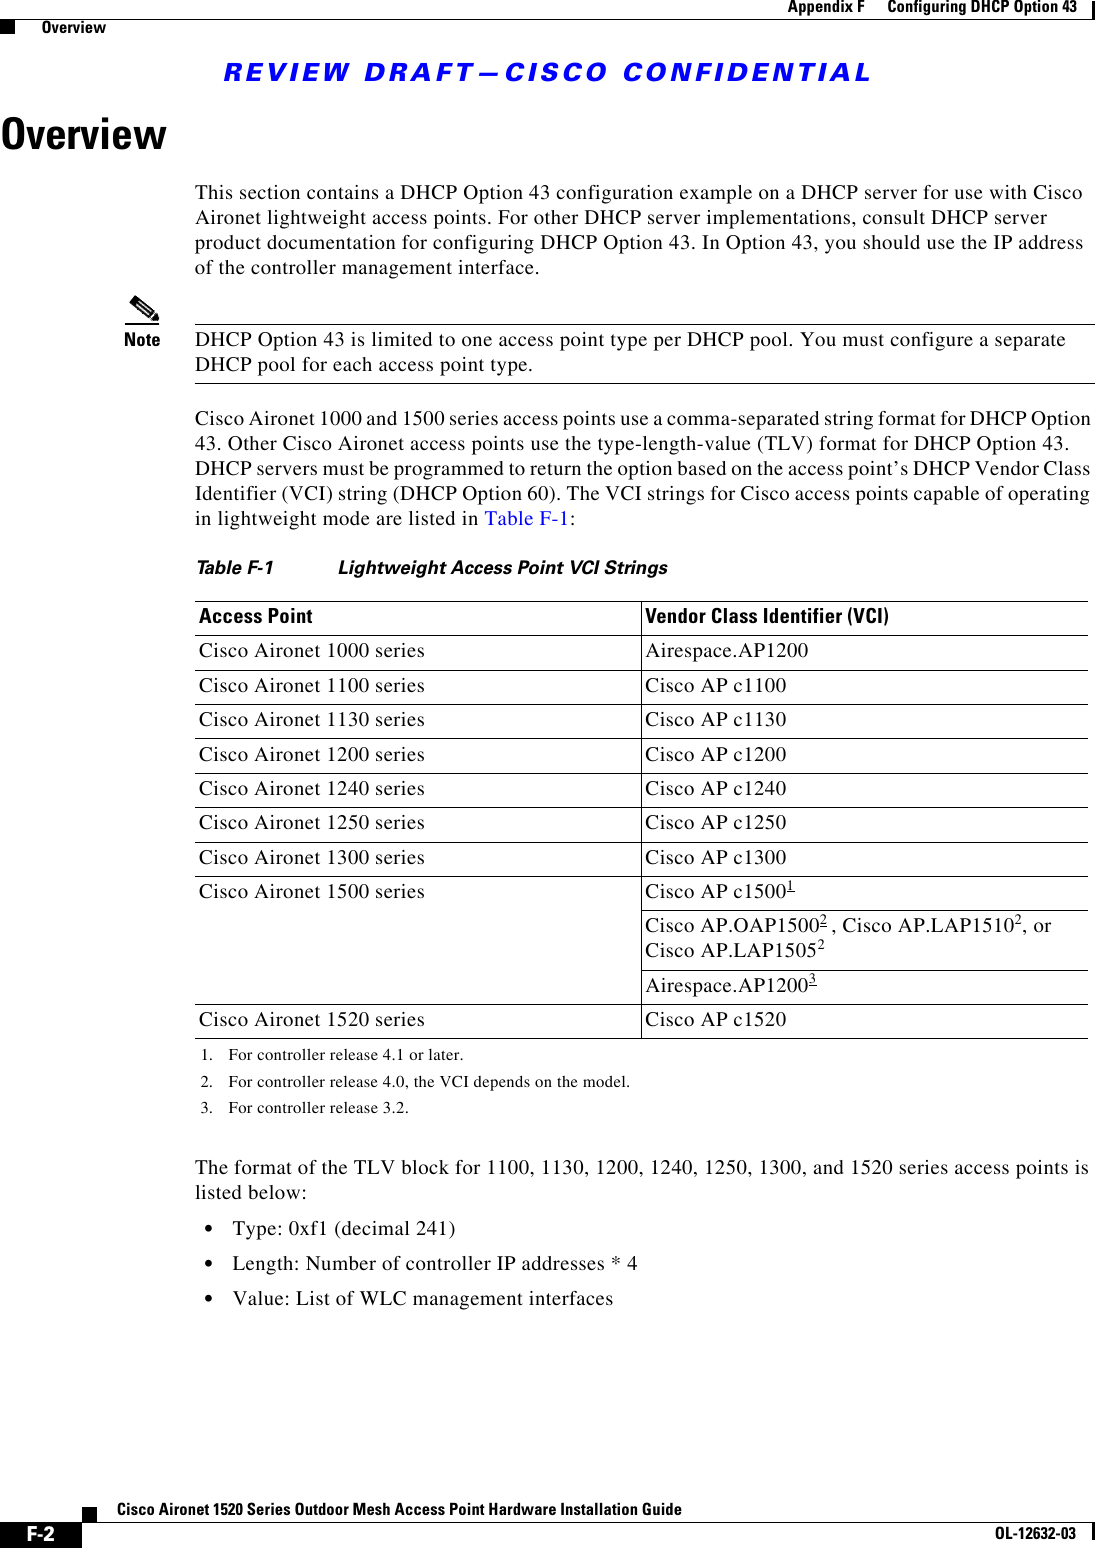 REVIEW DRAFT—CISCO CONFIDENTIALF-2Cisco Aironet 1520 Series Outdoor Mesh Access Point Hardware Installation GuideOL-12632-03Appendix F      Configuring DHCP Option 43  OverviewOverviewThis section contains a DHCP Option 43 configuration example on a DHCP server for use with Cisco Aironet lightweight access points. For other DHCP server implementations, consult DHCP server product documentation for configuring DHCP Option 43. In Option 43, you should use the IP address of the controller management interface.Note DHCP Option 43 is limited to one access point type per DHCP pool. You must configure a separate DHCP pool for each access point type.Cisco Aironet 1000 and 1500 series access points use a comma-separated string format for DHCP Option 43. Other Cisco Aironet access points use the type-length-value (TLV) format for DHCP Option 43. DHCP servers must be programmed to return the option based on the access point’s DHCP Vendor Class Identifier (VCI) string (DHCP Option 60). The VCI strings for Cisco access points capable of operating in lightweight mode are listed in Table F-1: The format of the TLV block for 1100, 1130, 1200, 1240, 1250, 1300, and 1520 series access points is listed below:   • Type: 0xf1 (decimal 241)   • Length: Number of controller IP addresses * 4   • Value: List of WLC management interfaces Ta b l e  F-1 Lightweight Access Point VCI StringsAccess Point Vendor Class Identifier (VCI)Cisco Aironet 1000 series Airespace.AP1200Cisco Aironet 1100 series Cisco AP c1100Cisco Aironet 1130 series Cisco AP c1130Cisco Aironet 1200 series Cisco AP c1200Cisco Aironet 1240 series Cisco AP c1240Cisco Aironet 1250 series Cisco AP c1250Cisco Aironet 1300 series Cisco AP c1300Cisco Aironet 1500 series Cisco AP c150011. For controller release 4.1 or later.Cisco AP.OAP15002 , Cisco AP.LAP15102, or Cisco AP.LAP15052 2. For controller release 4.0, the VCI depends on the model.Airespace.AP120033. For controller release 3.2.Cisco Aironet 1520 series Cisco AP c1520